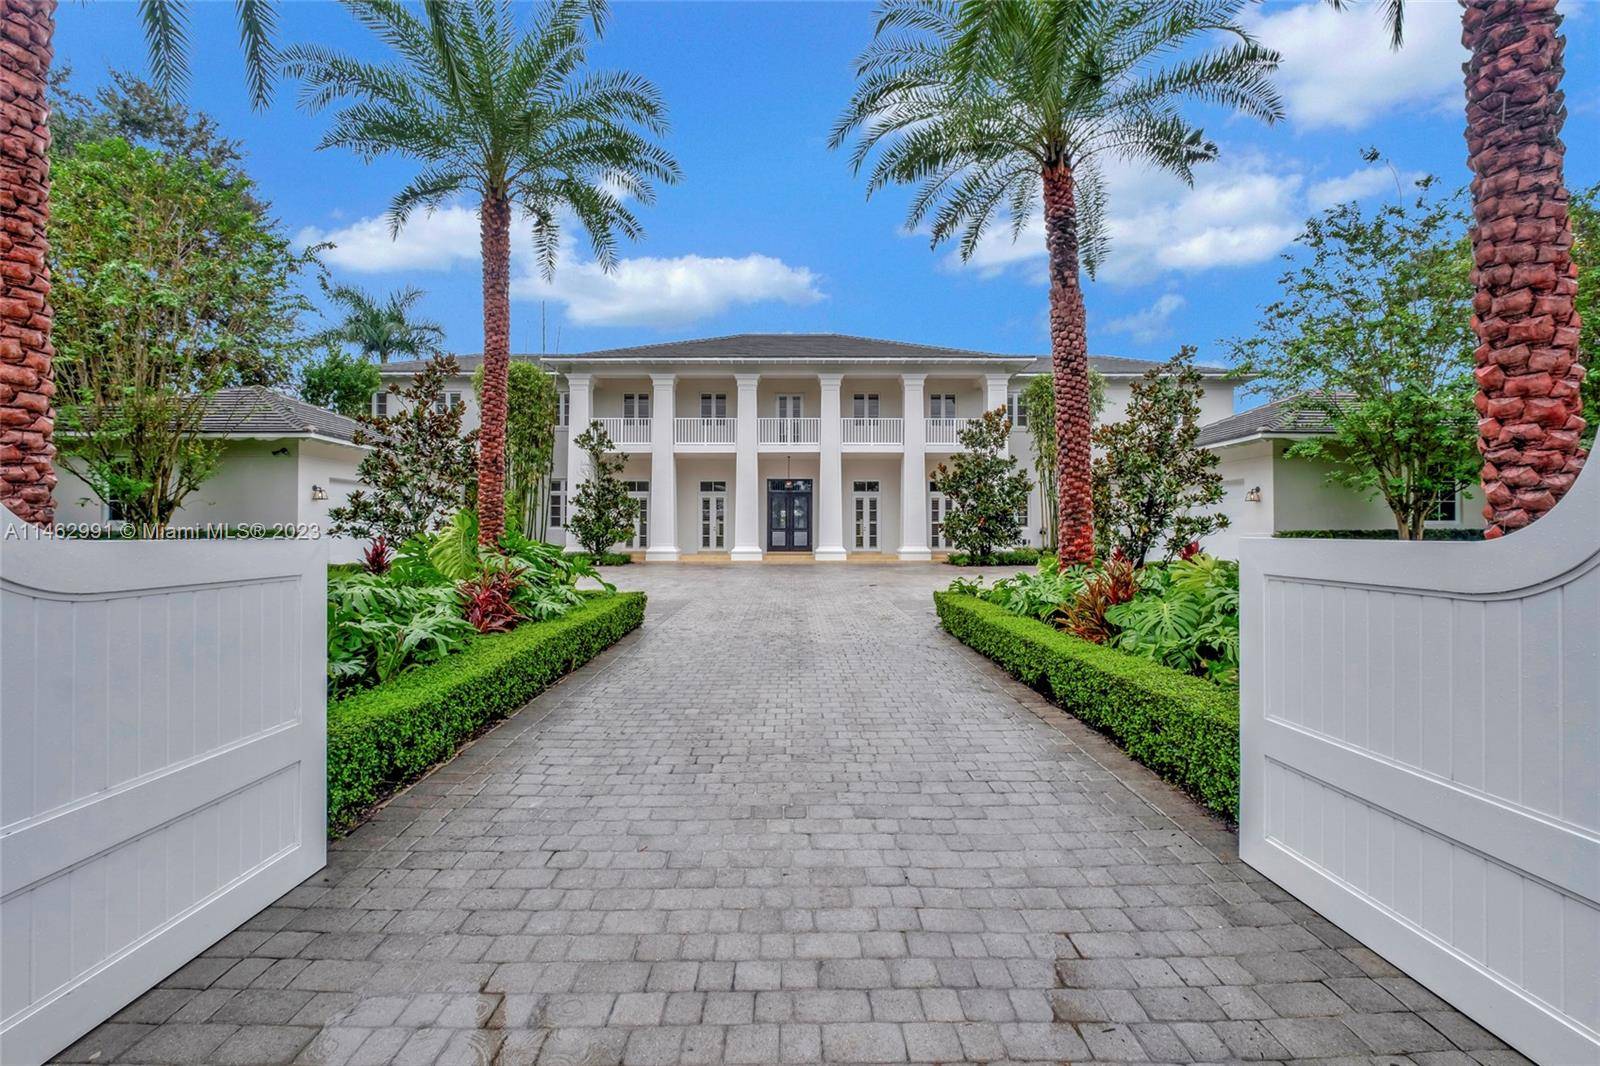 Elegant Colonial style estate was designed by renowned architect Cesar Molina.